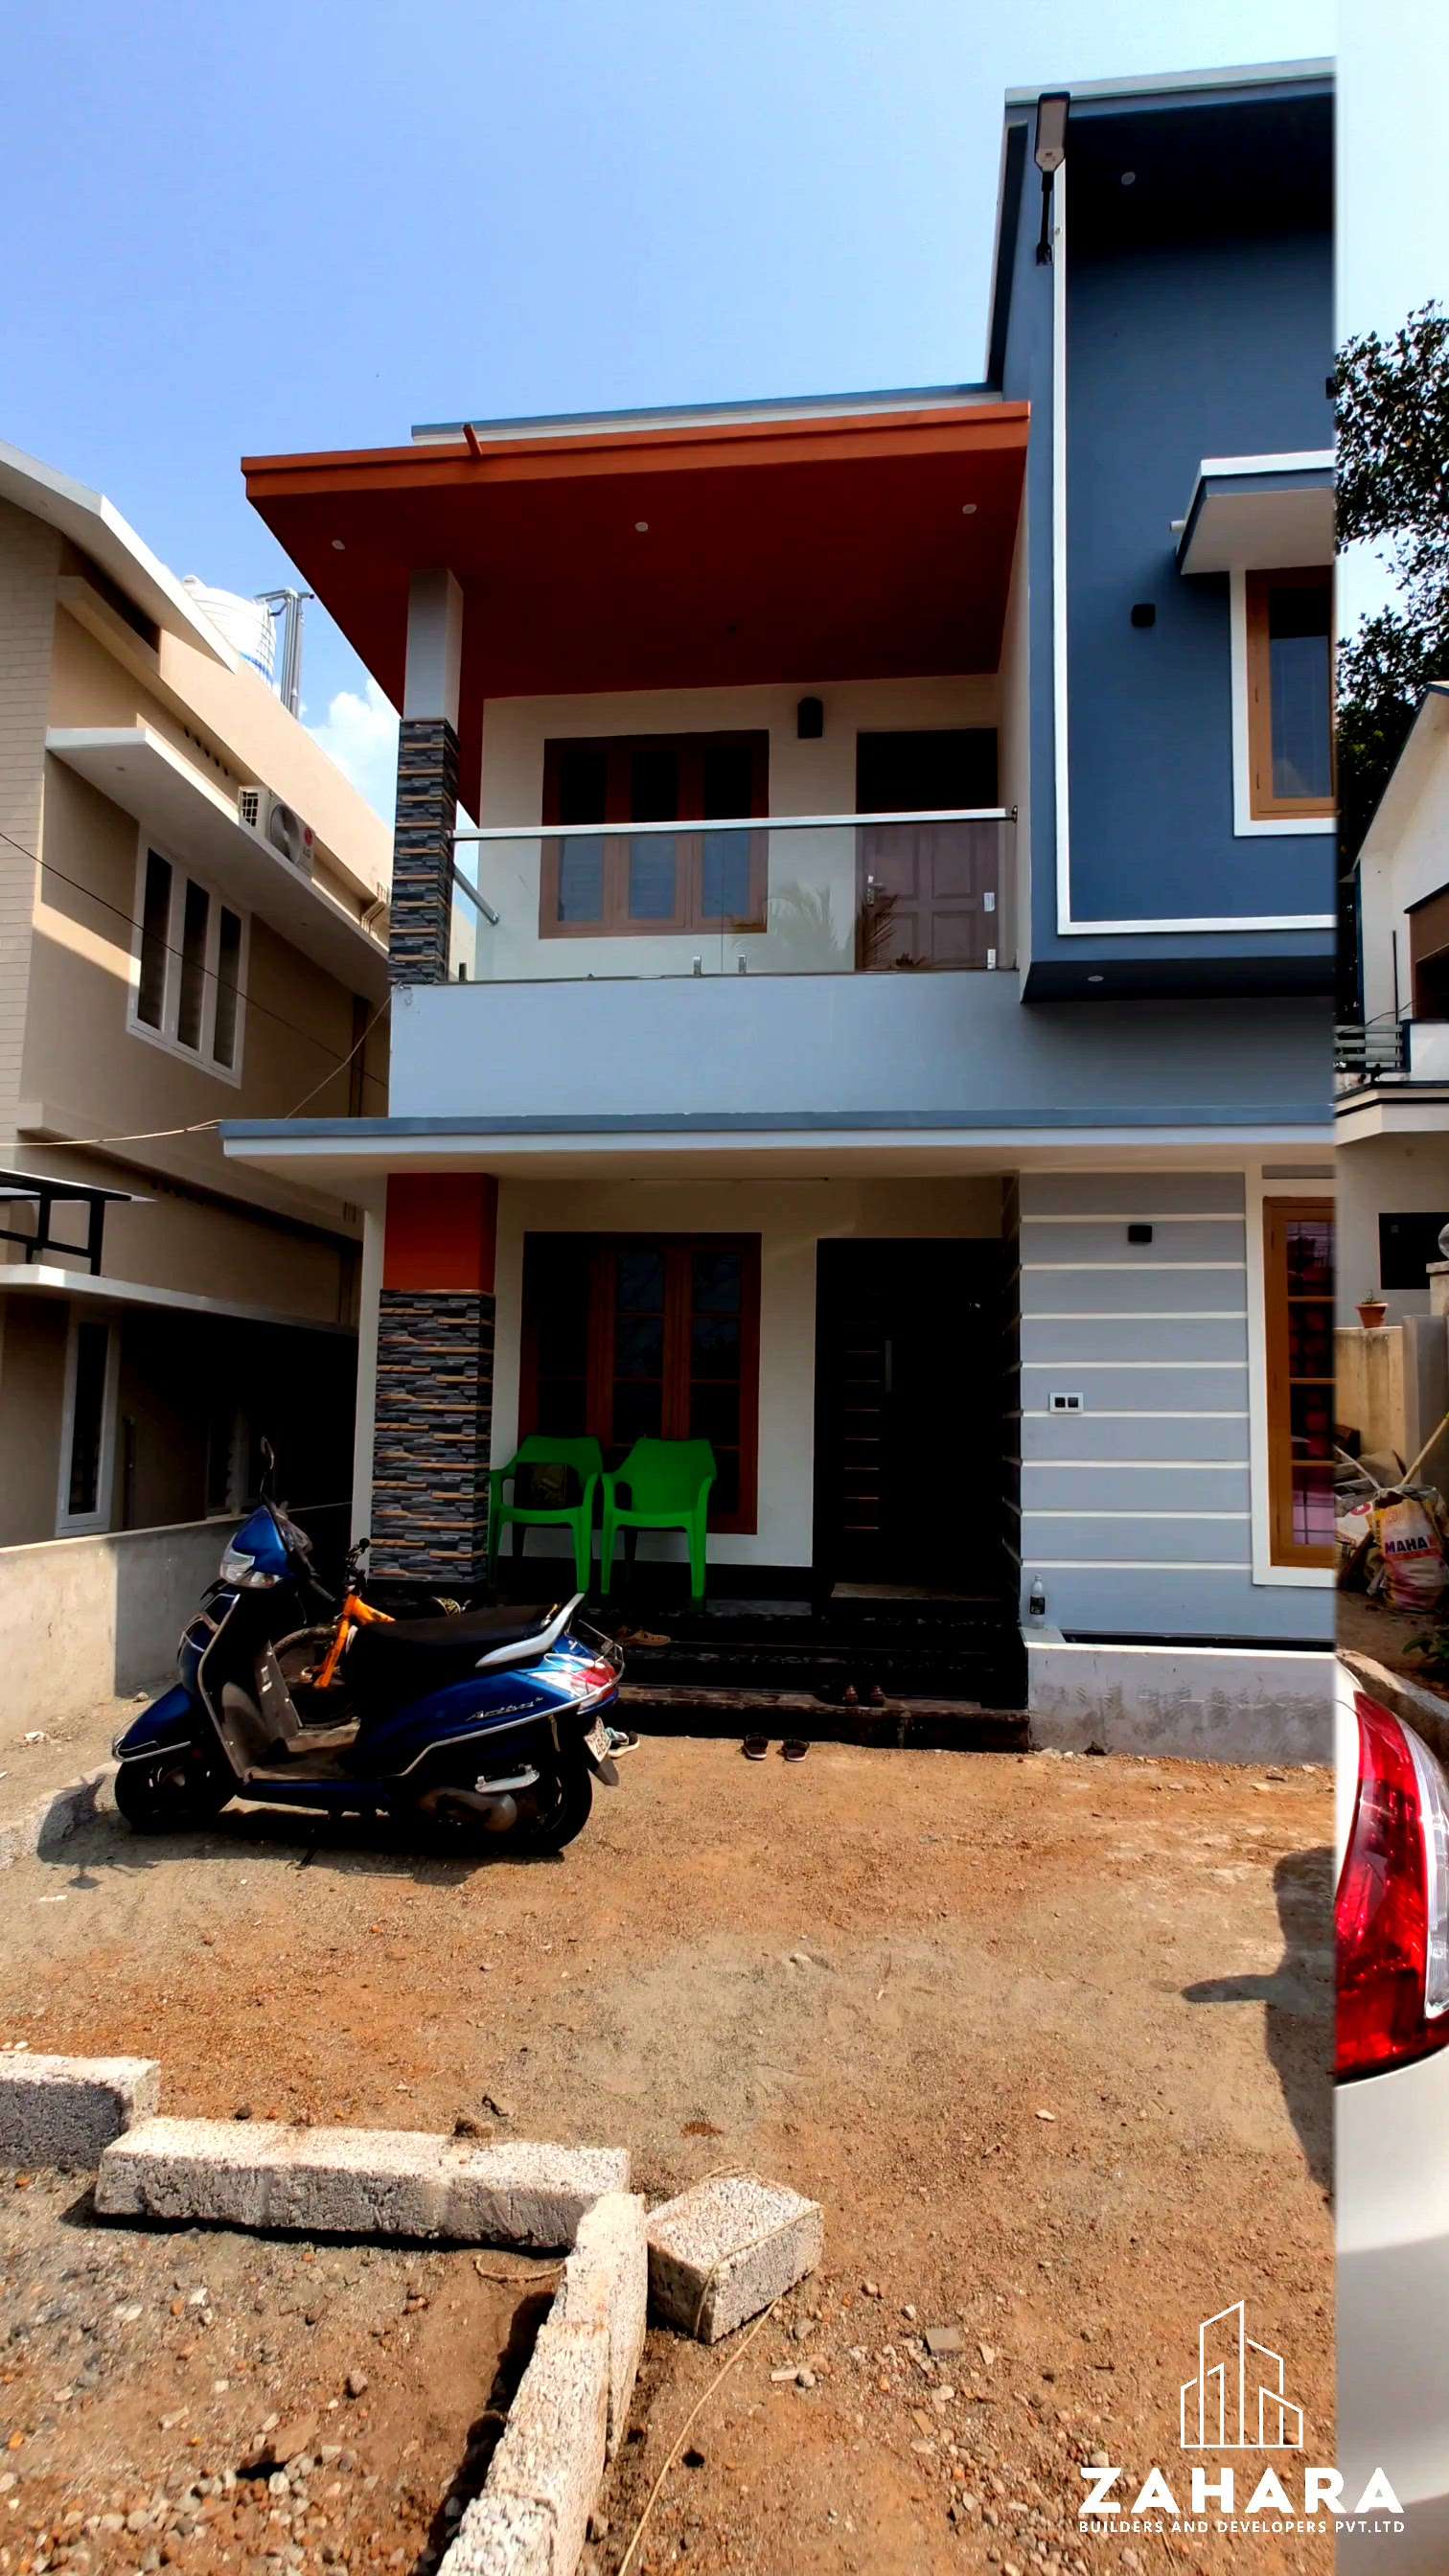 1441/3bhk/Modern style
/double storey/Ernakulam

Project Name: 3bhk,Modern style house 
Storey: double
Total Area: 1441
Bed Room: 3bhk
Elevation Style: Modern
Location: Ernakulam
Completed Year: 

Cost: 26 lakh
Plot Size: